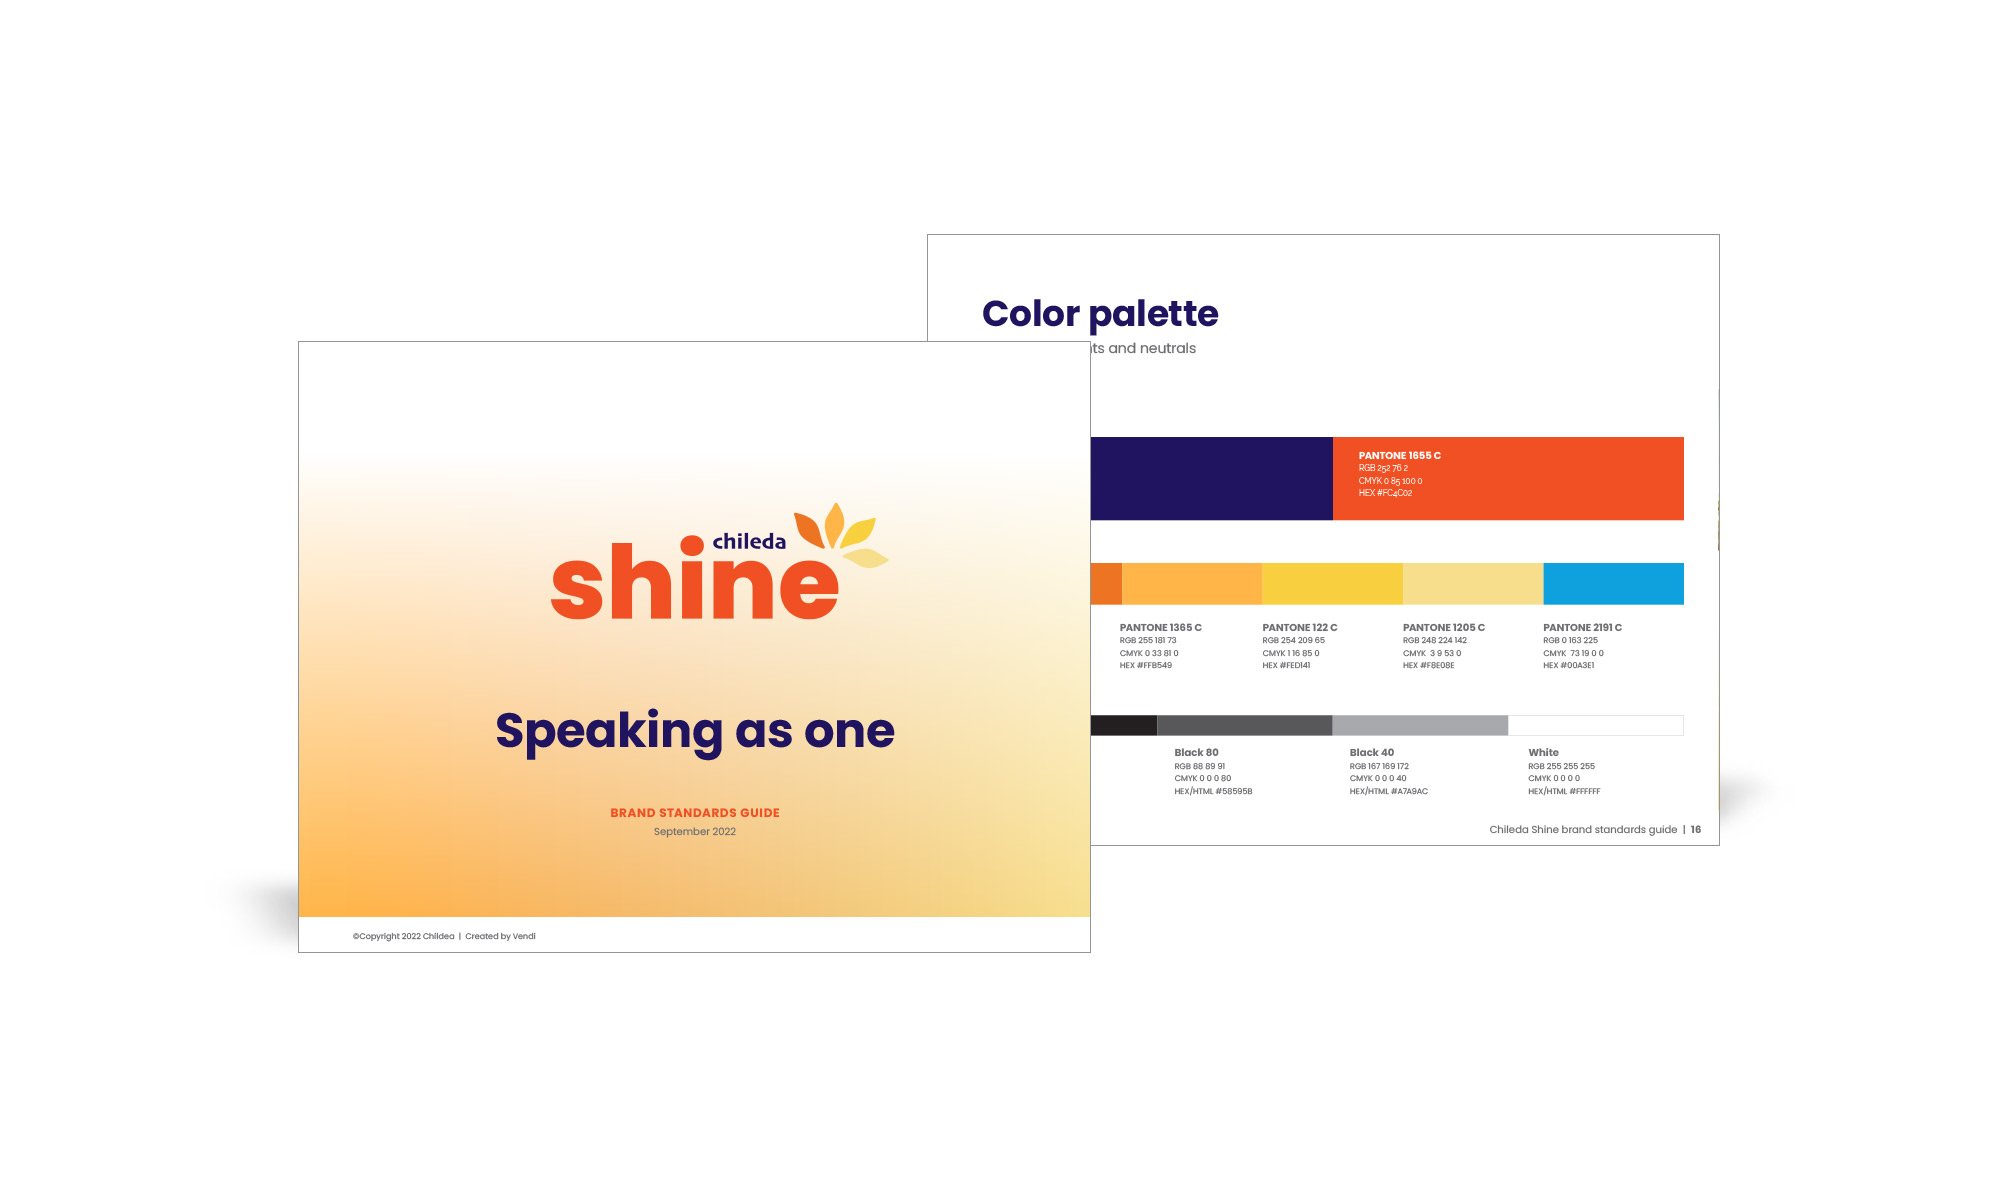 New Chileda Shine brand standards guide. Includes color palettes of bright oranges and blues